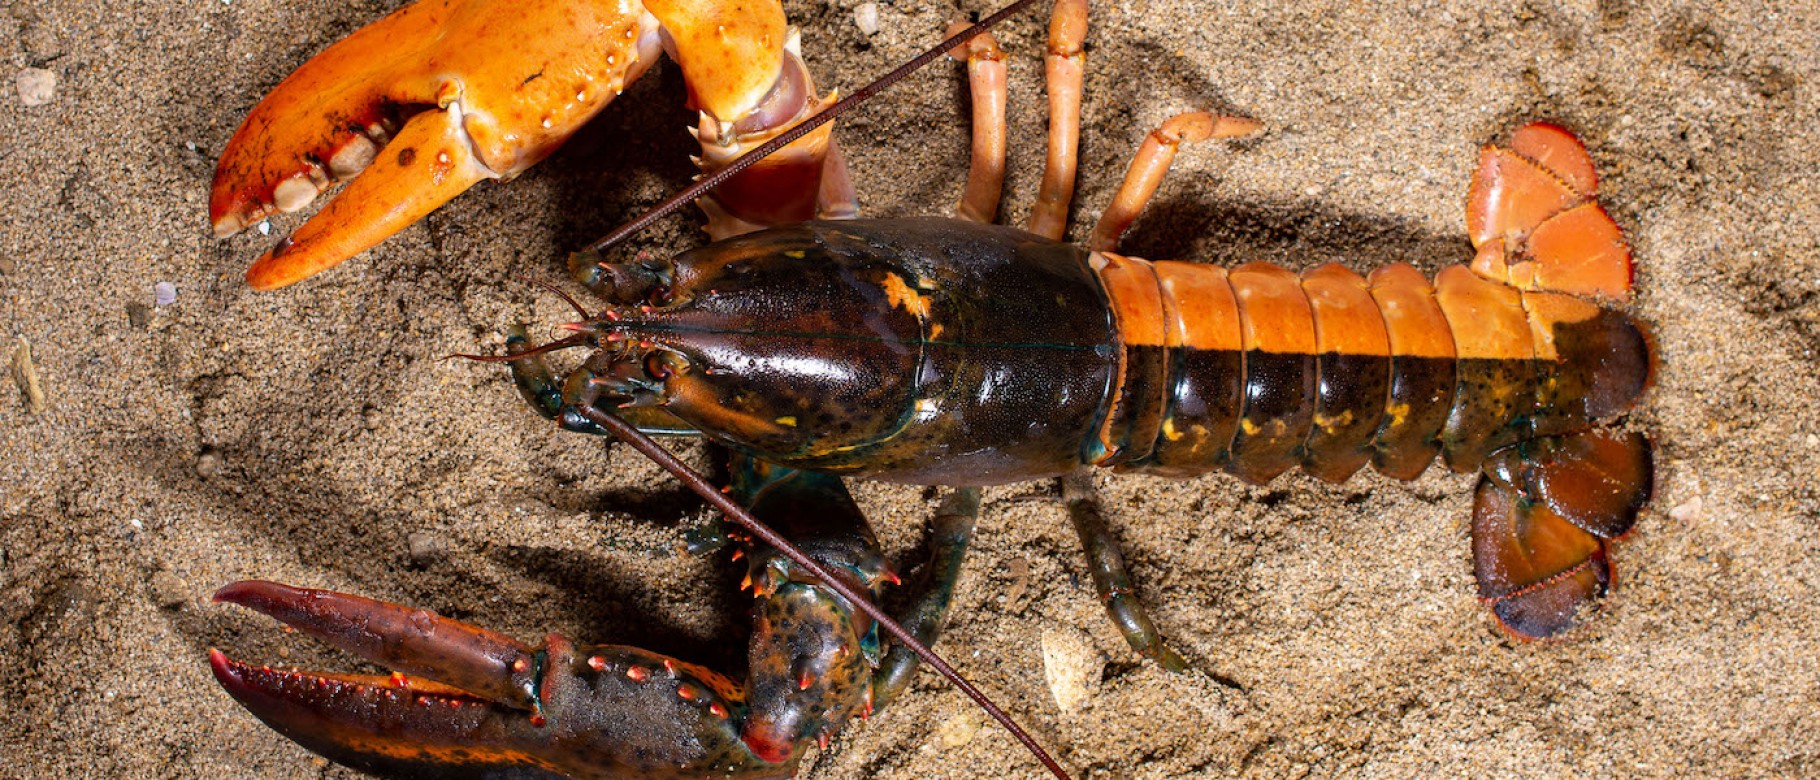 UNE's Marine Science Center home to another rare lobster